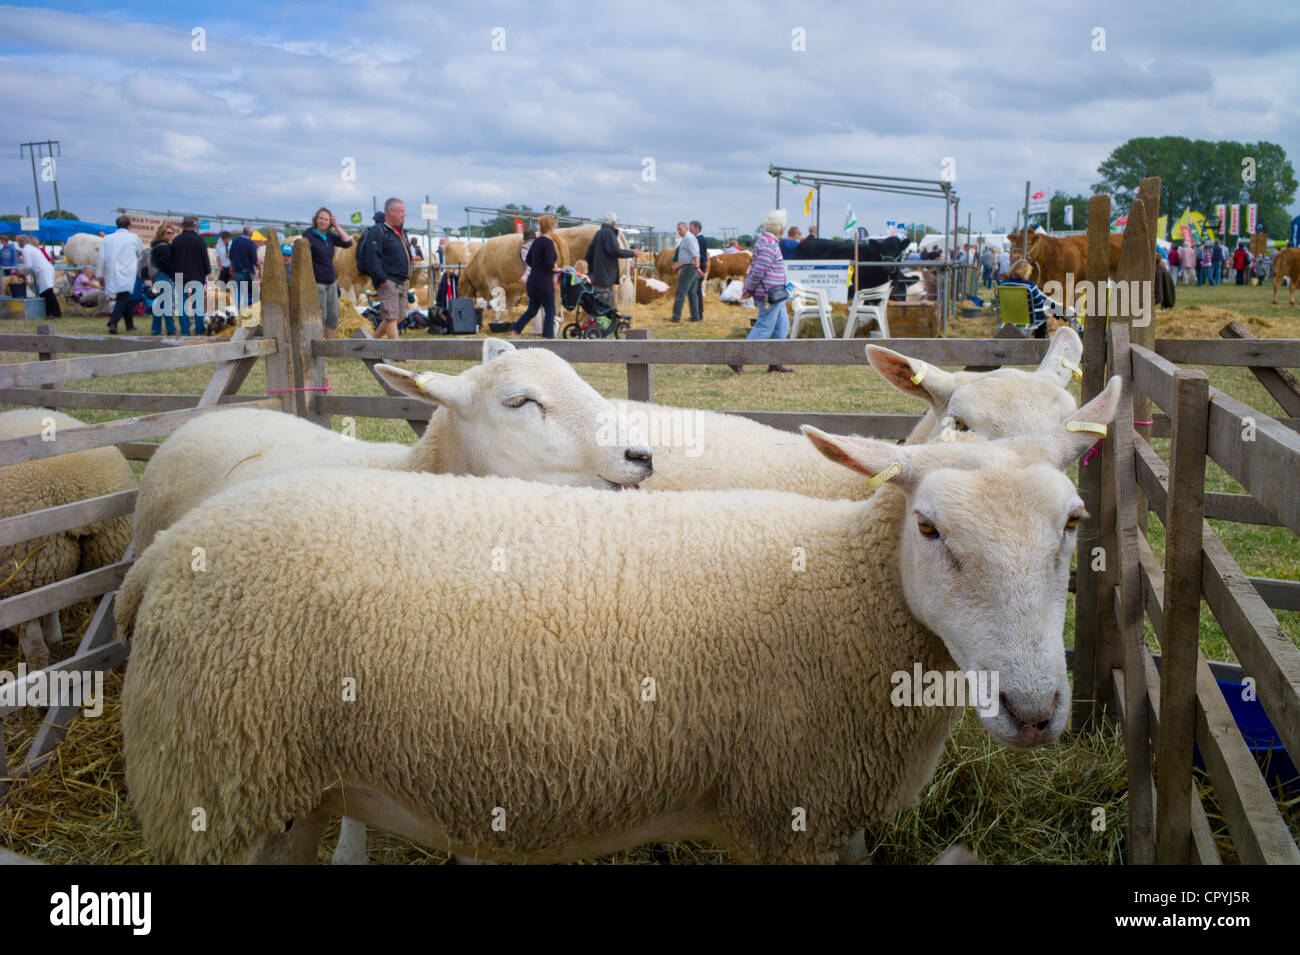 Sheep at Moreton Show, agricultural event at Moreton-in-the-Marsh Showground, The Cotswolds, Gloucestershire, UK Stock Photo